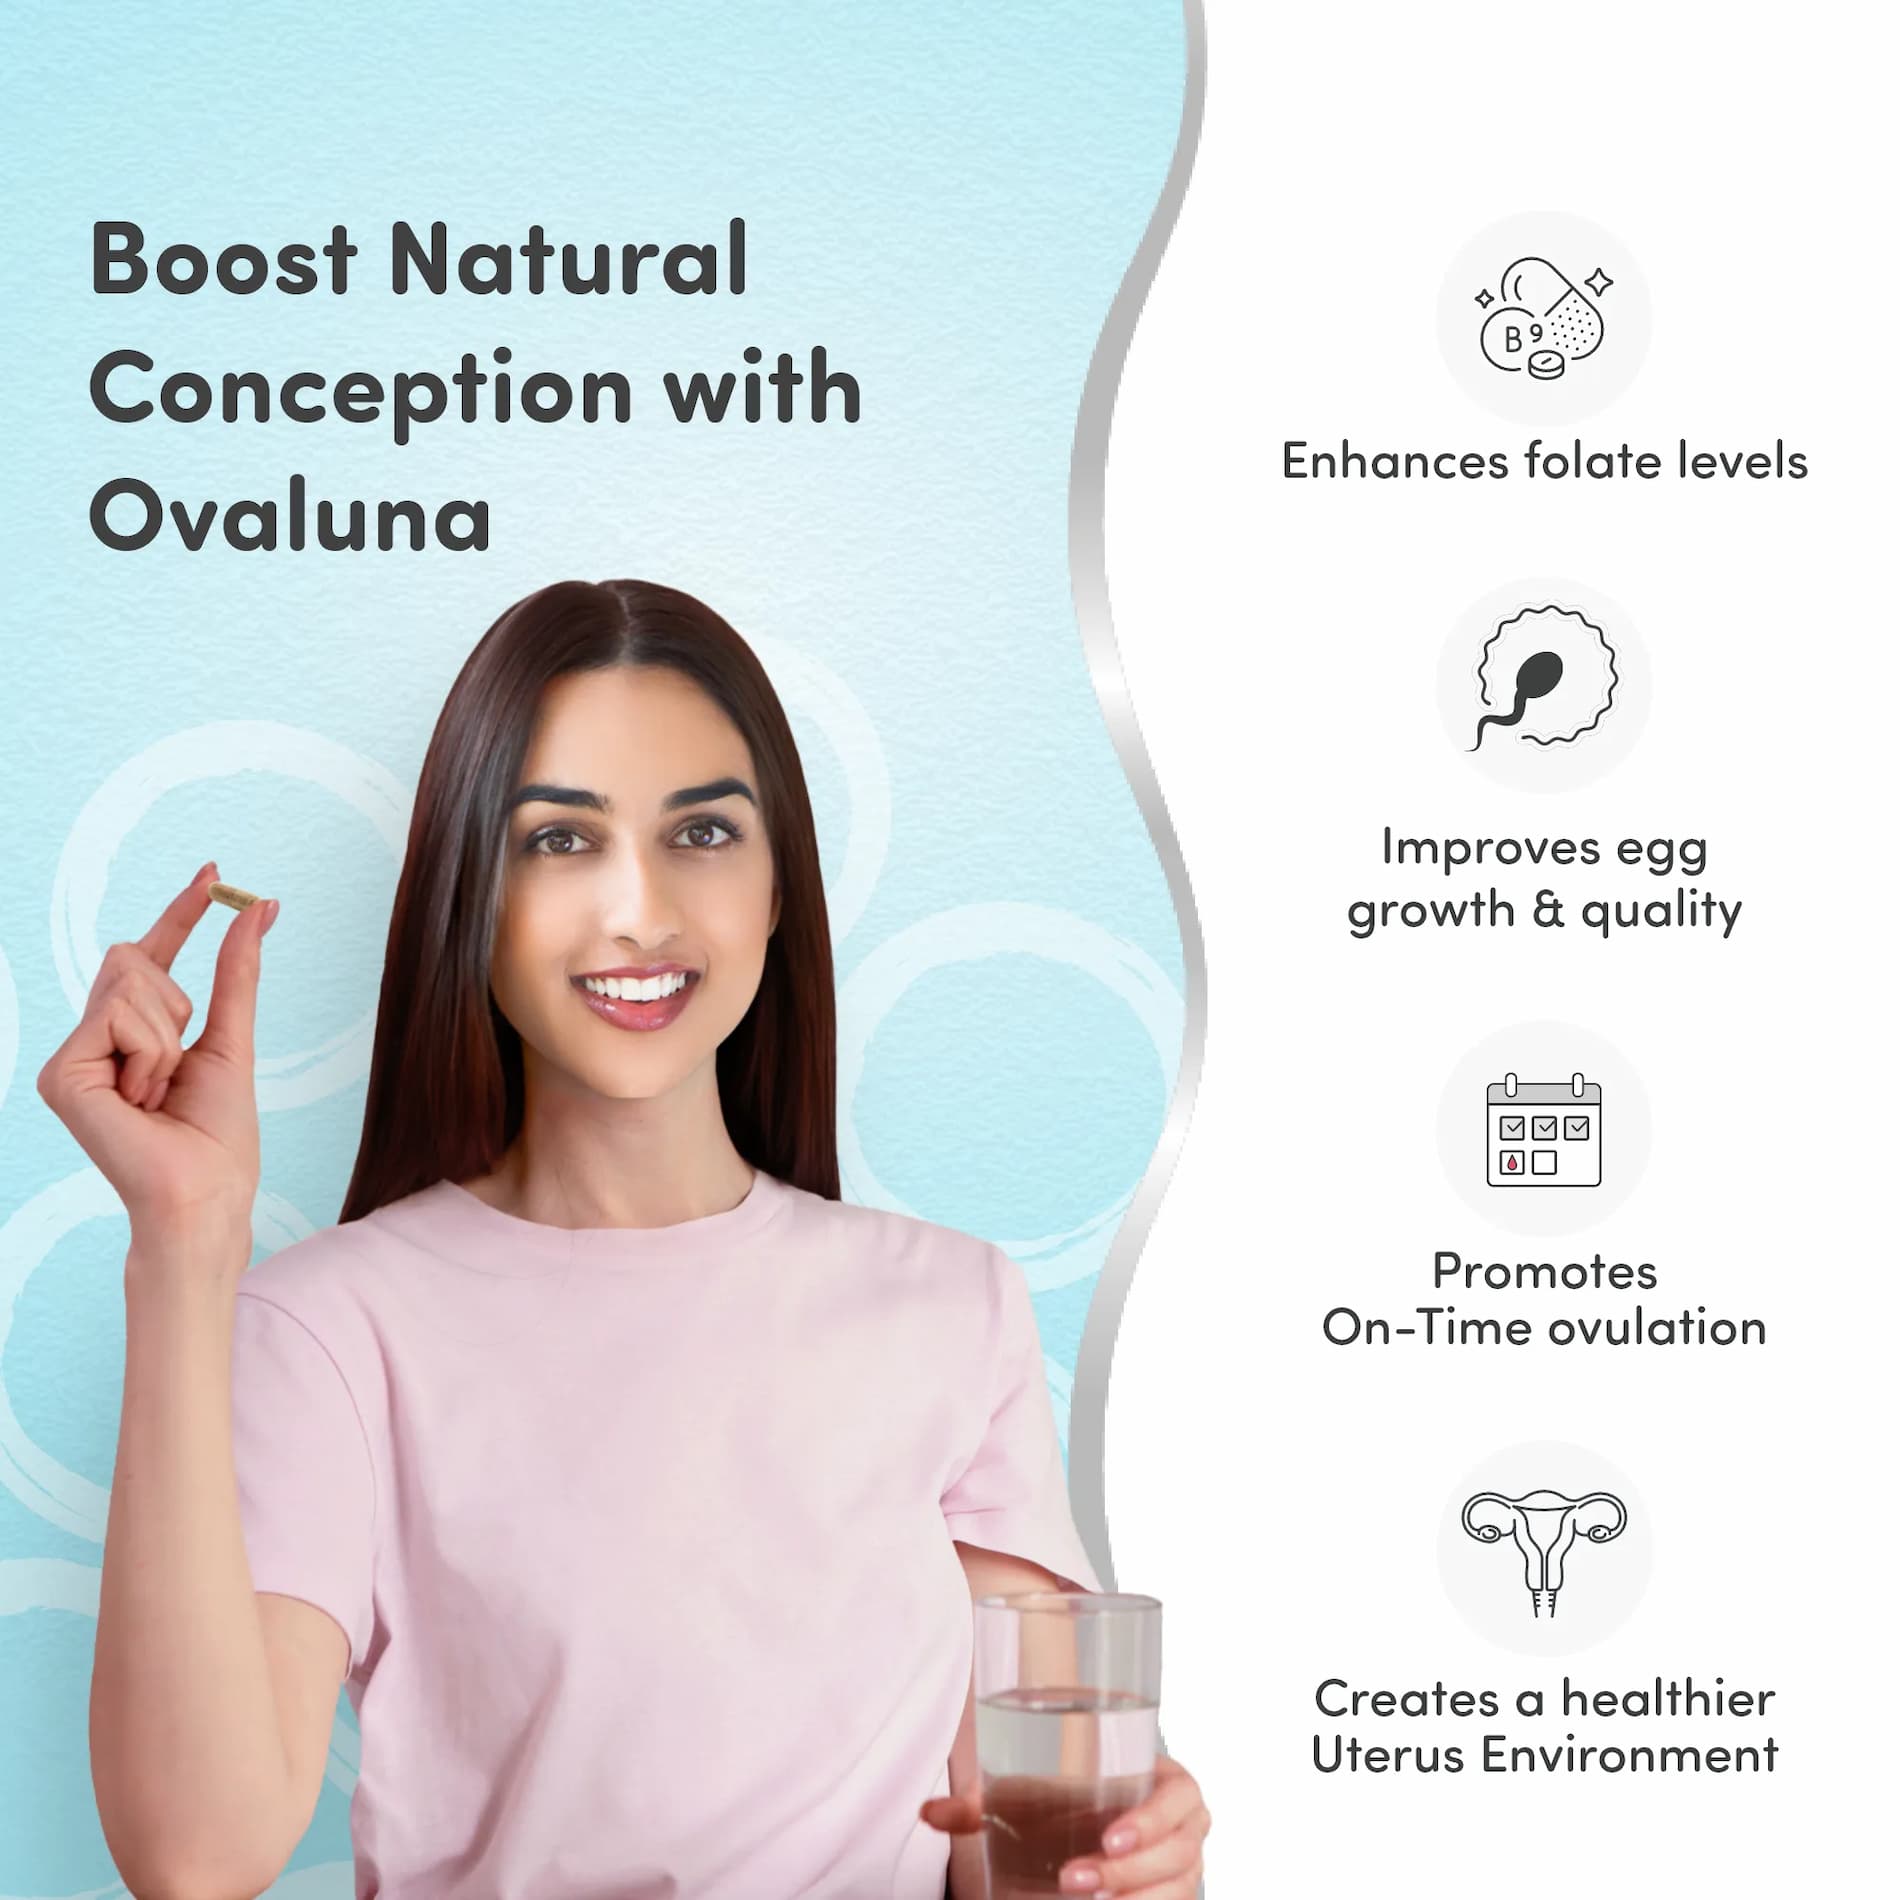 Ovaluna Conception Fertility Supplements for Women | Prenatal Vitamins | Promote Natural Conception | Improve egg quality, Hormone Balance, Cycle Consistency | Aid Ovulation | 60 Vegetarian Capsules - Pack of 3